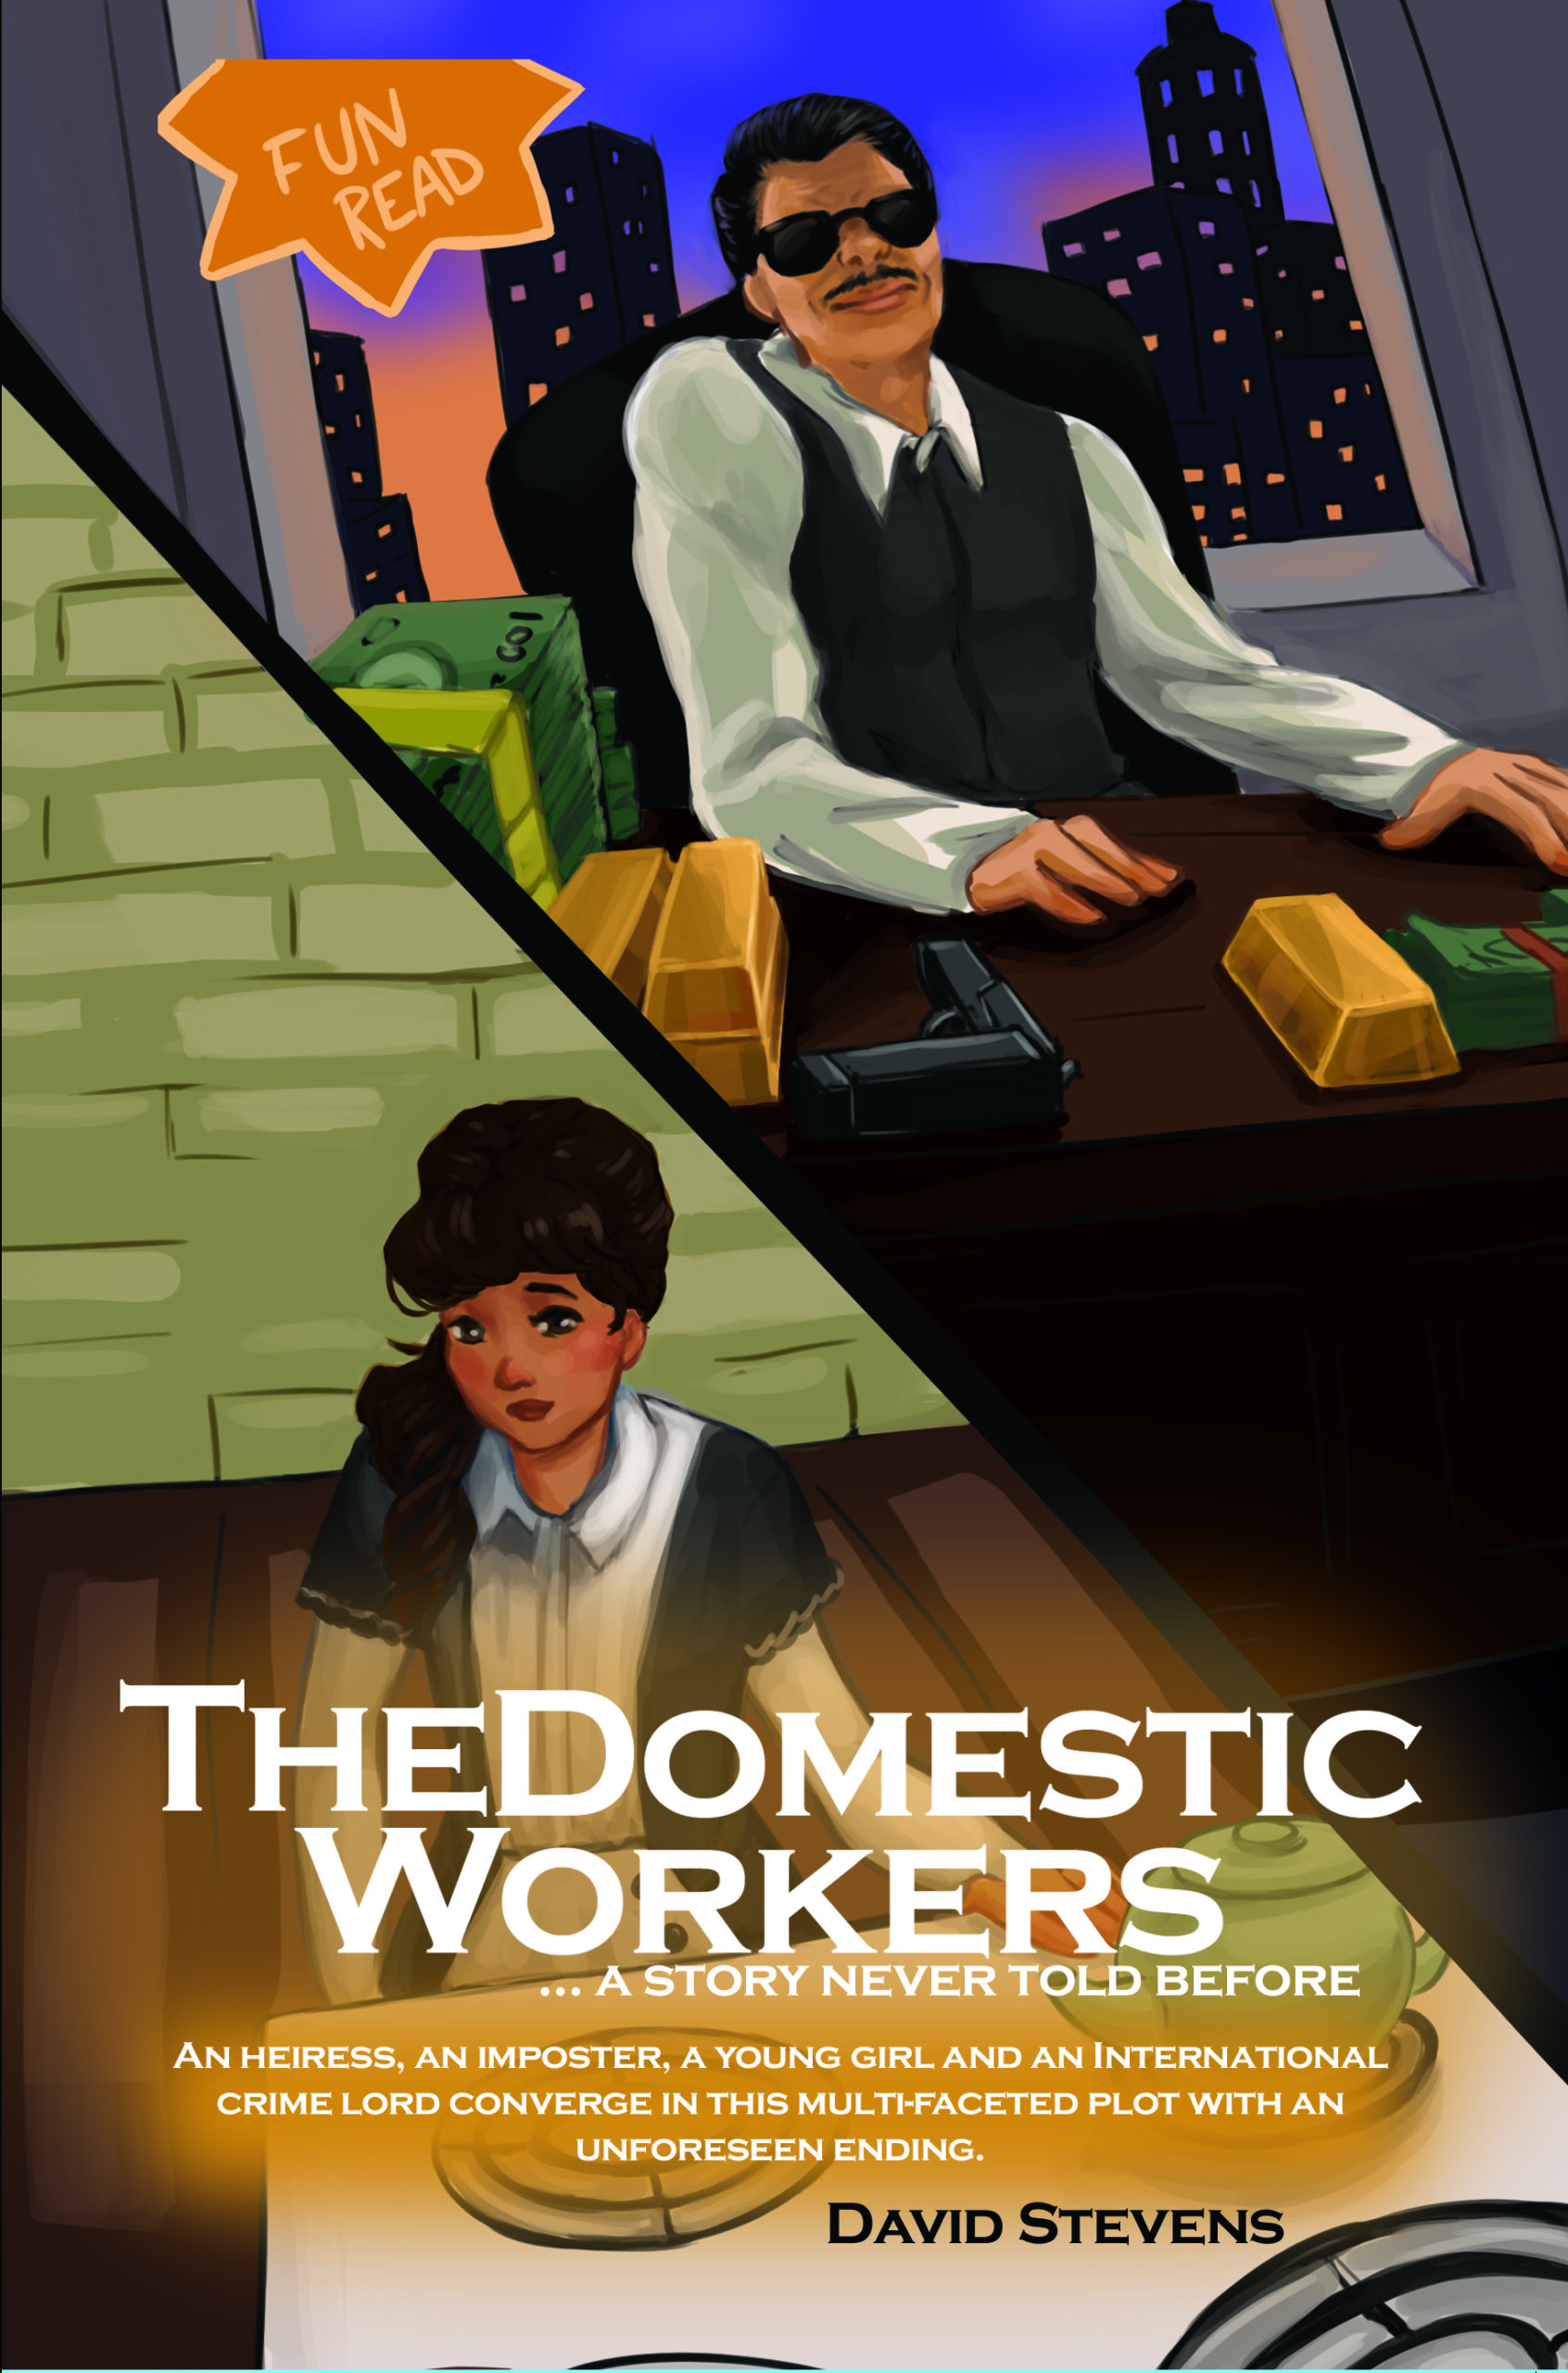 The Domestic Workers